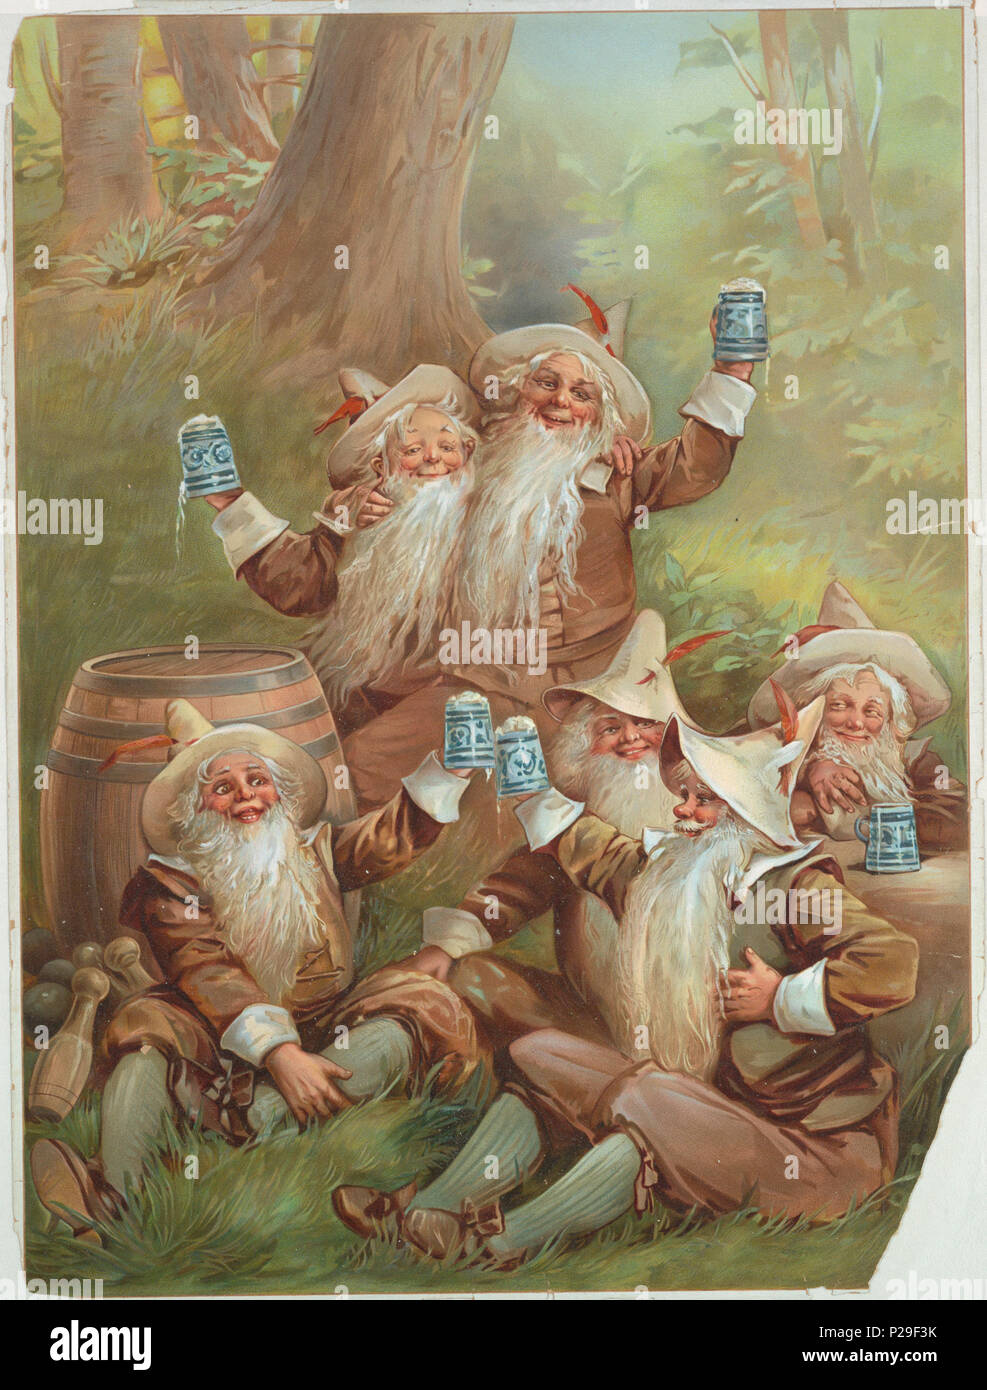 .  English: Print, Advertisement for Beer, ca. 1898 .  English: Vertical rectangle. Six smiling bearded gnomes in the grassy woods, holding steins of beer, many raising their steins in the air. Each wears a brown hat with a red feather, brown shirt, pants, shoes, and green stockings. Gnome at left leans against a large wooden barrel. To his left are bowling pins and balls. . circa 1898 267 Print, Advertisement for Beer, ca. 1898 (CH 18458565-2) Stock Photo